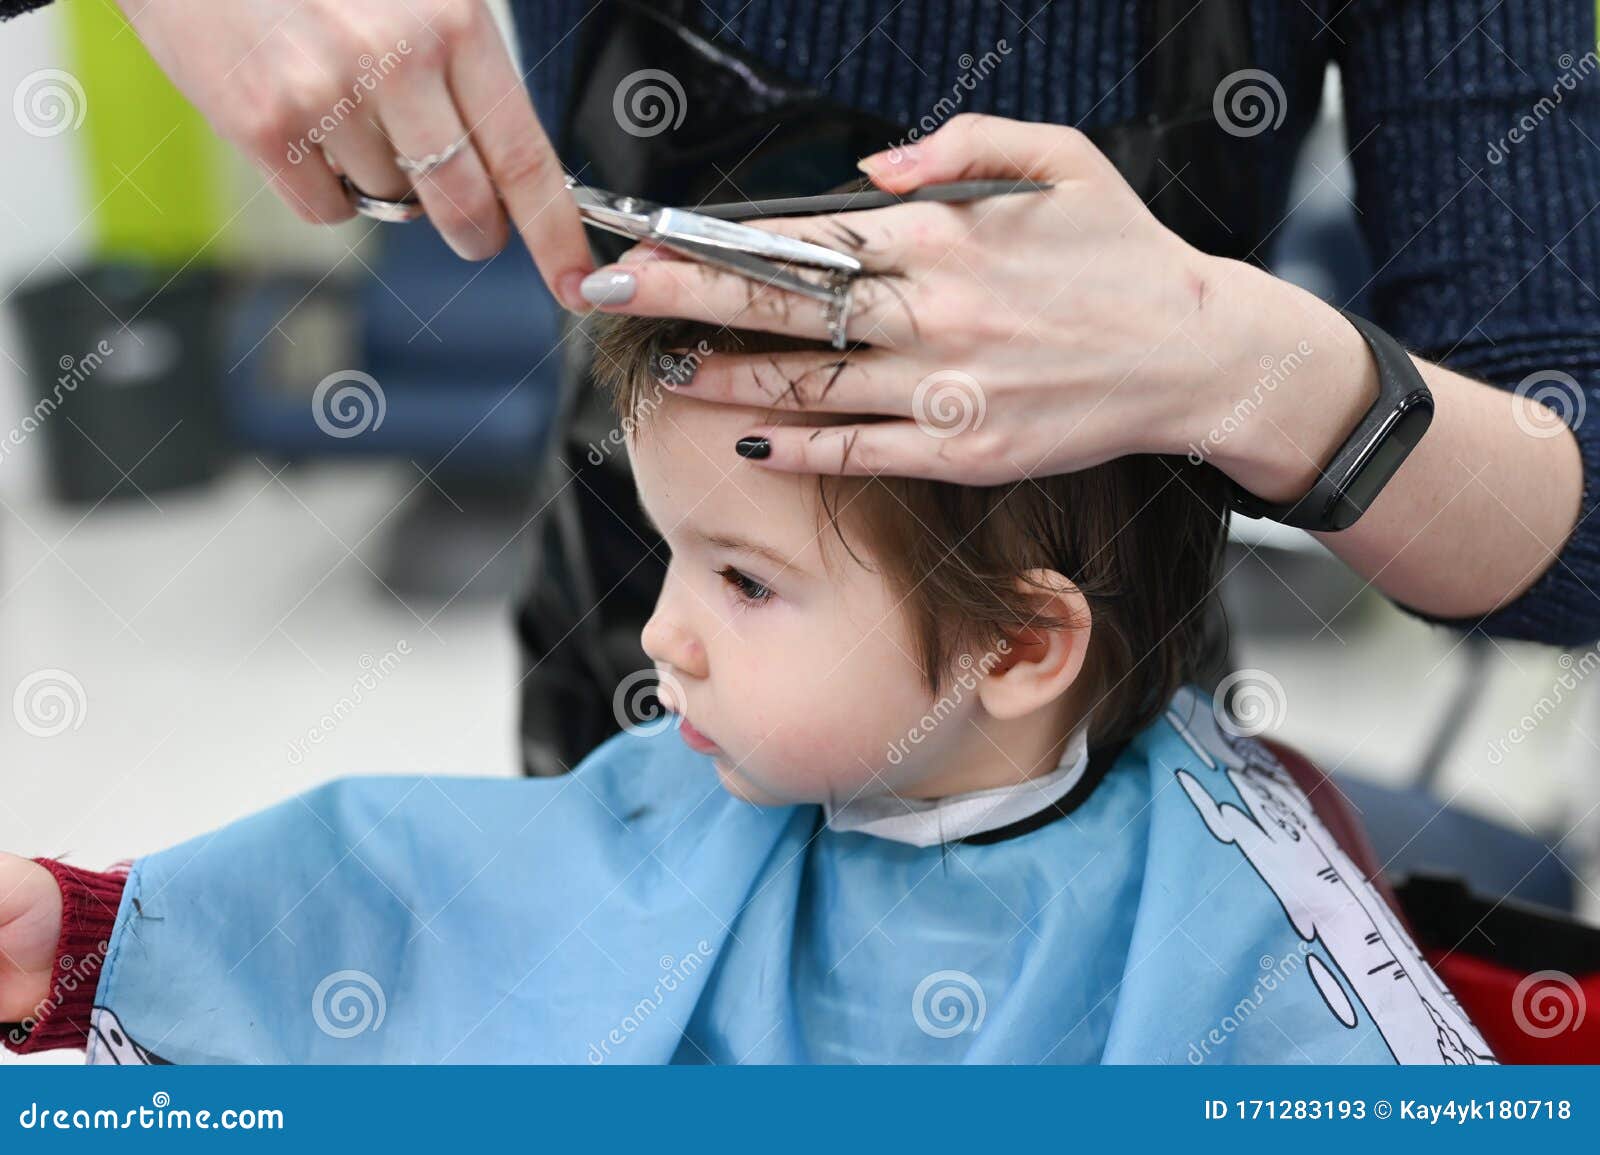 Haircut Boy 0-1 Years. the First Haircut of the Child at the Hairdresser  Stock Image - Image of brunette, barber: 171283193